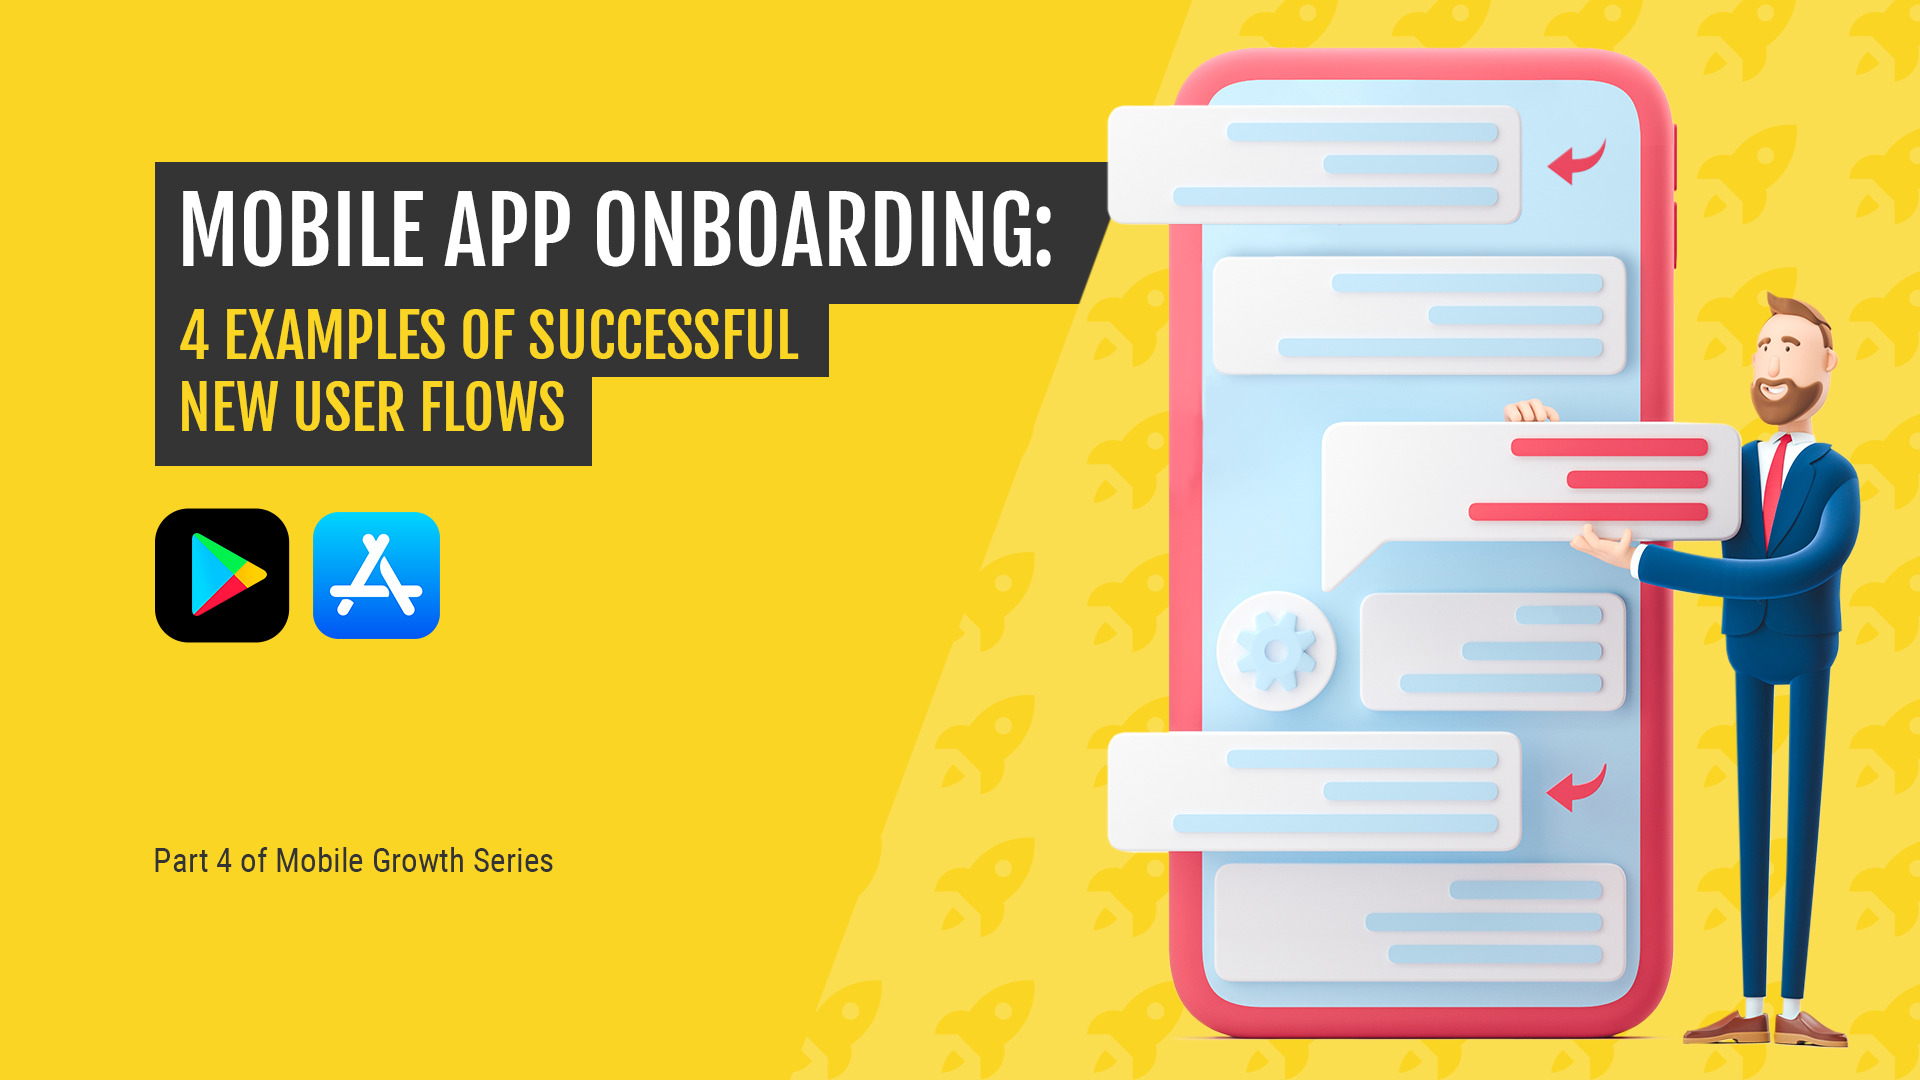 Mobile App Onboarding: 4 examples of successful new user flows